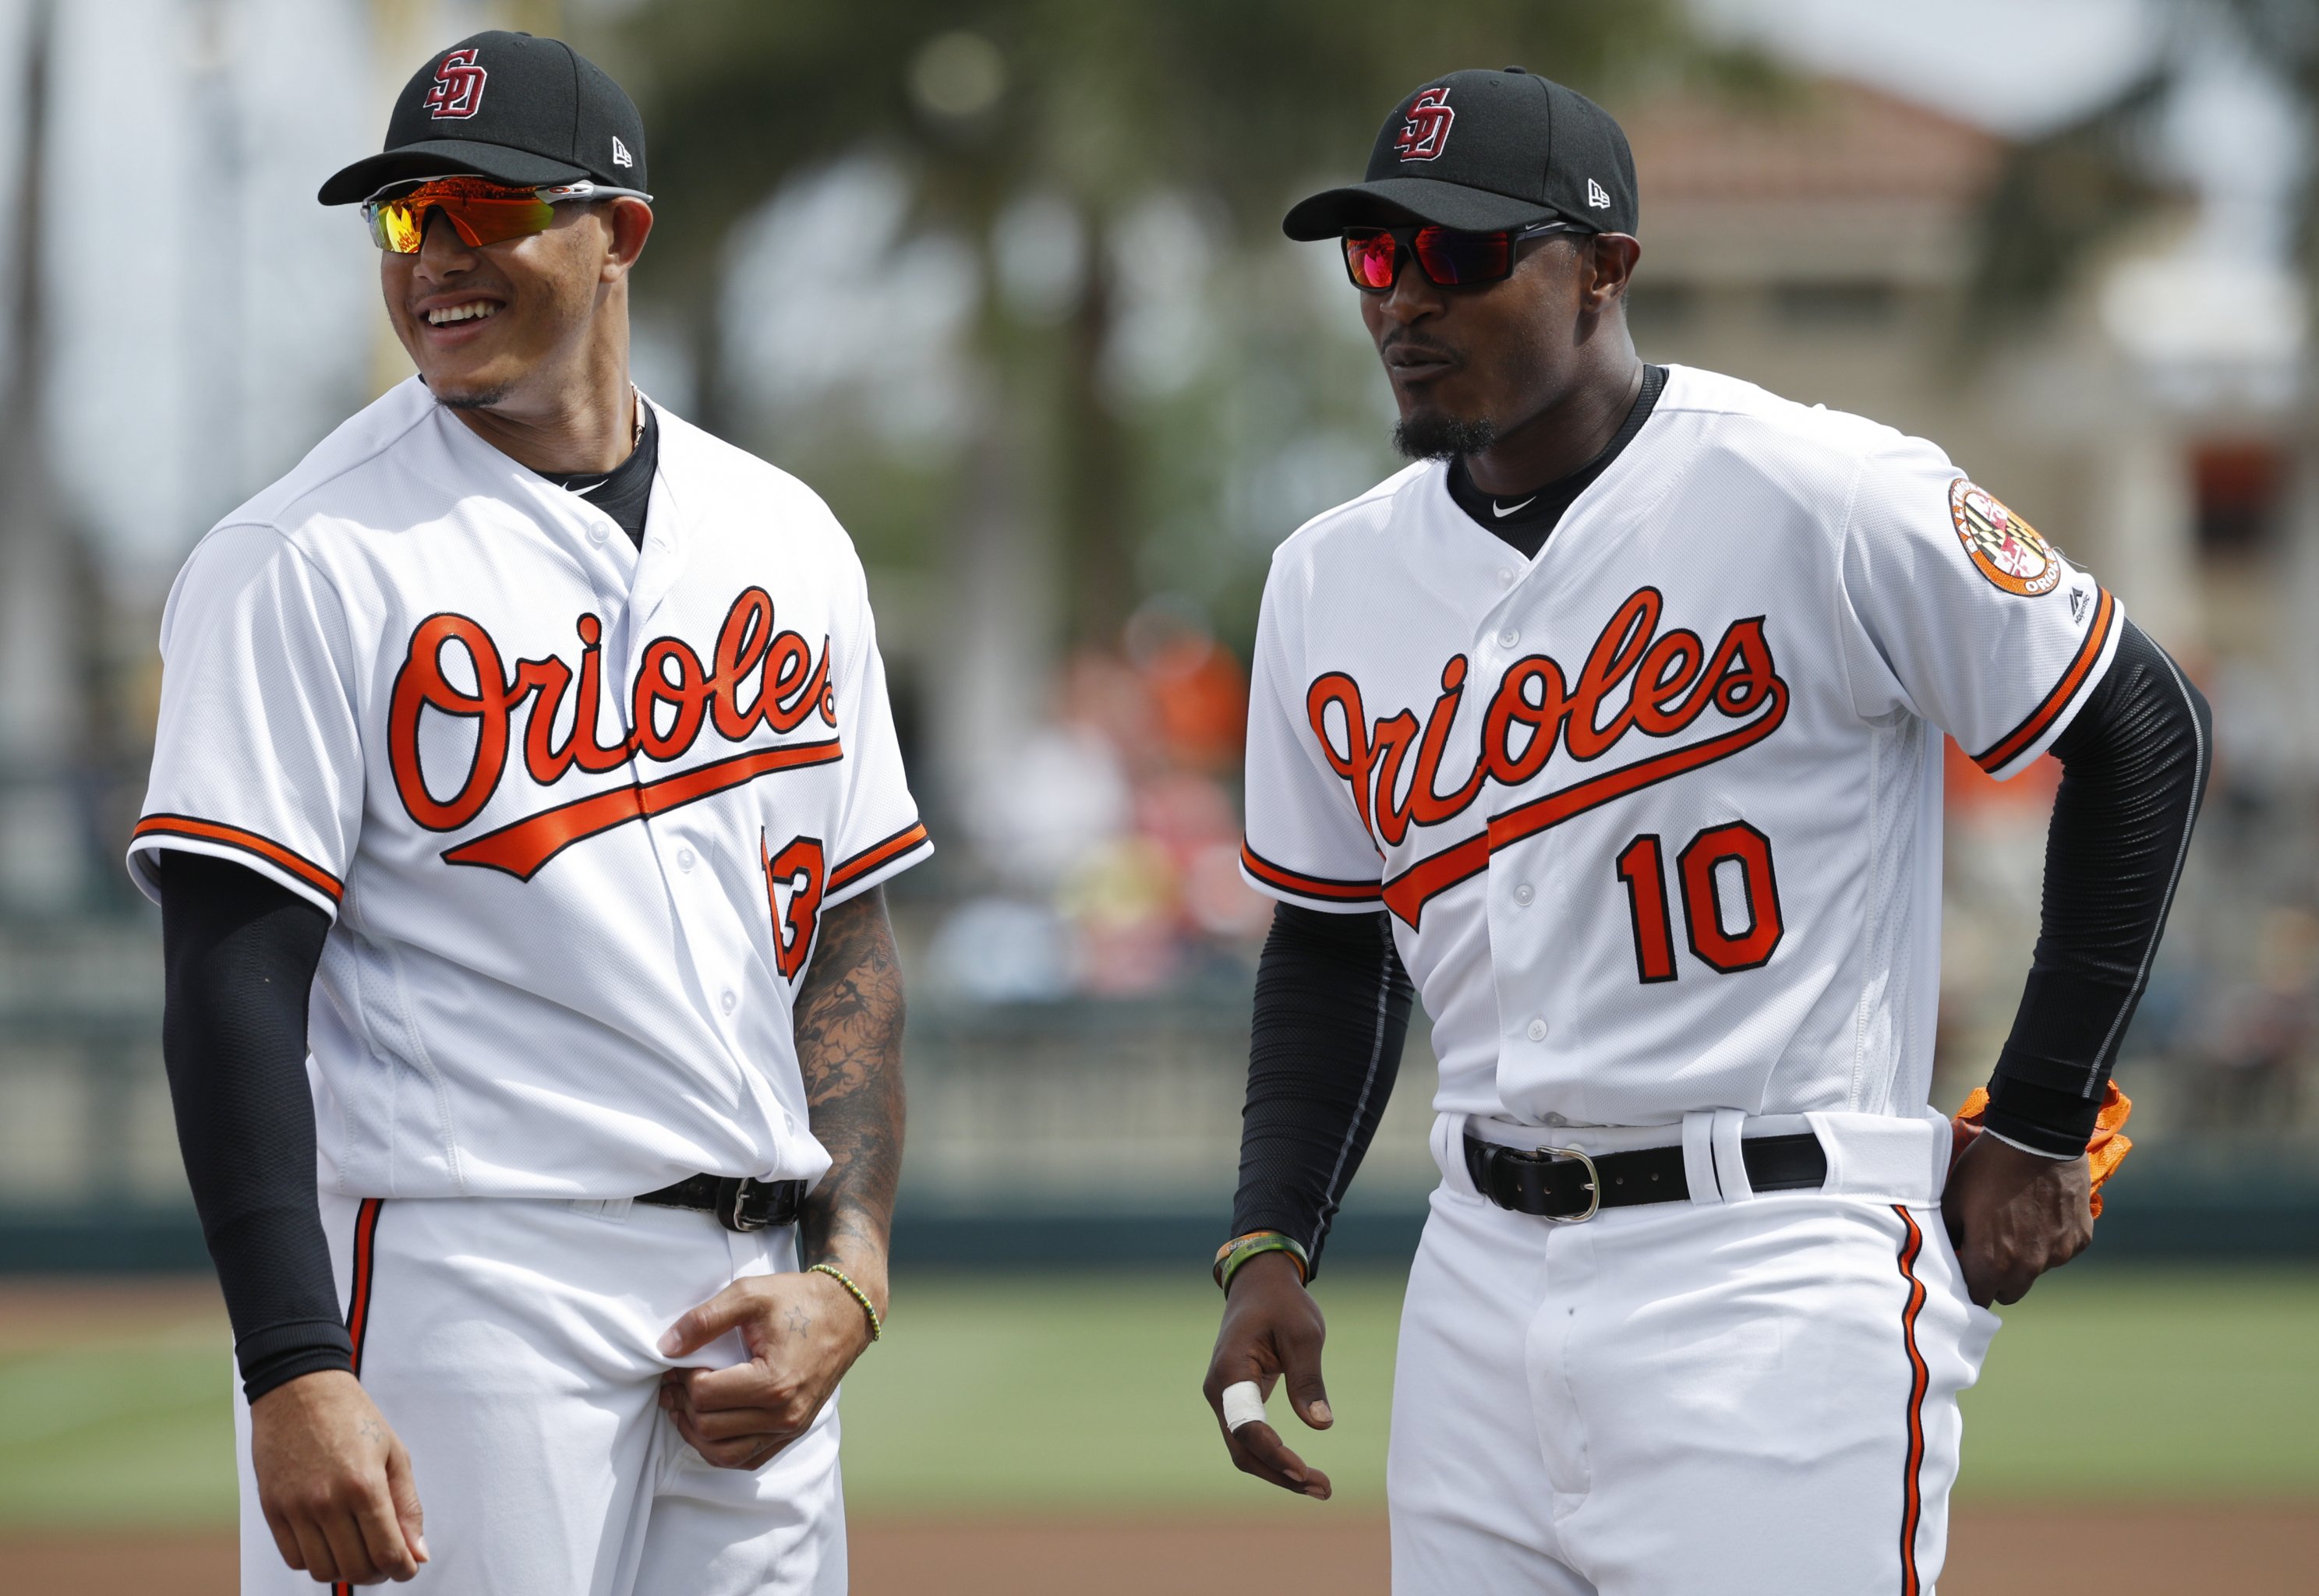 Back in Baltimore, former Oriole Steve Pearce is fond of his old